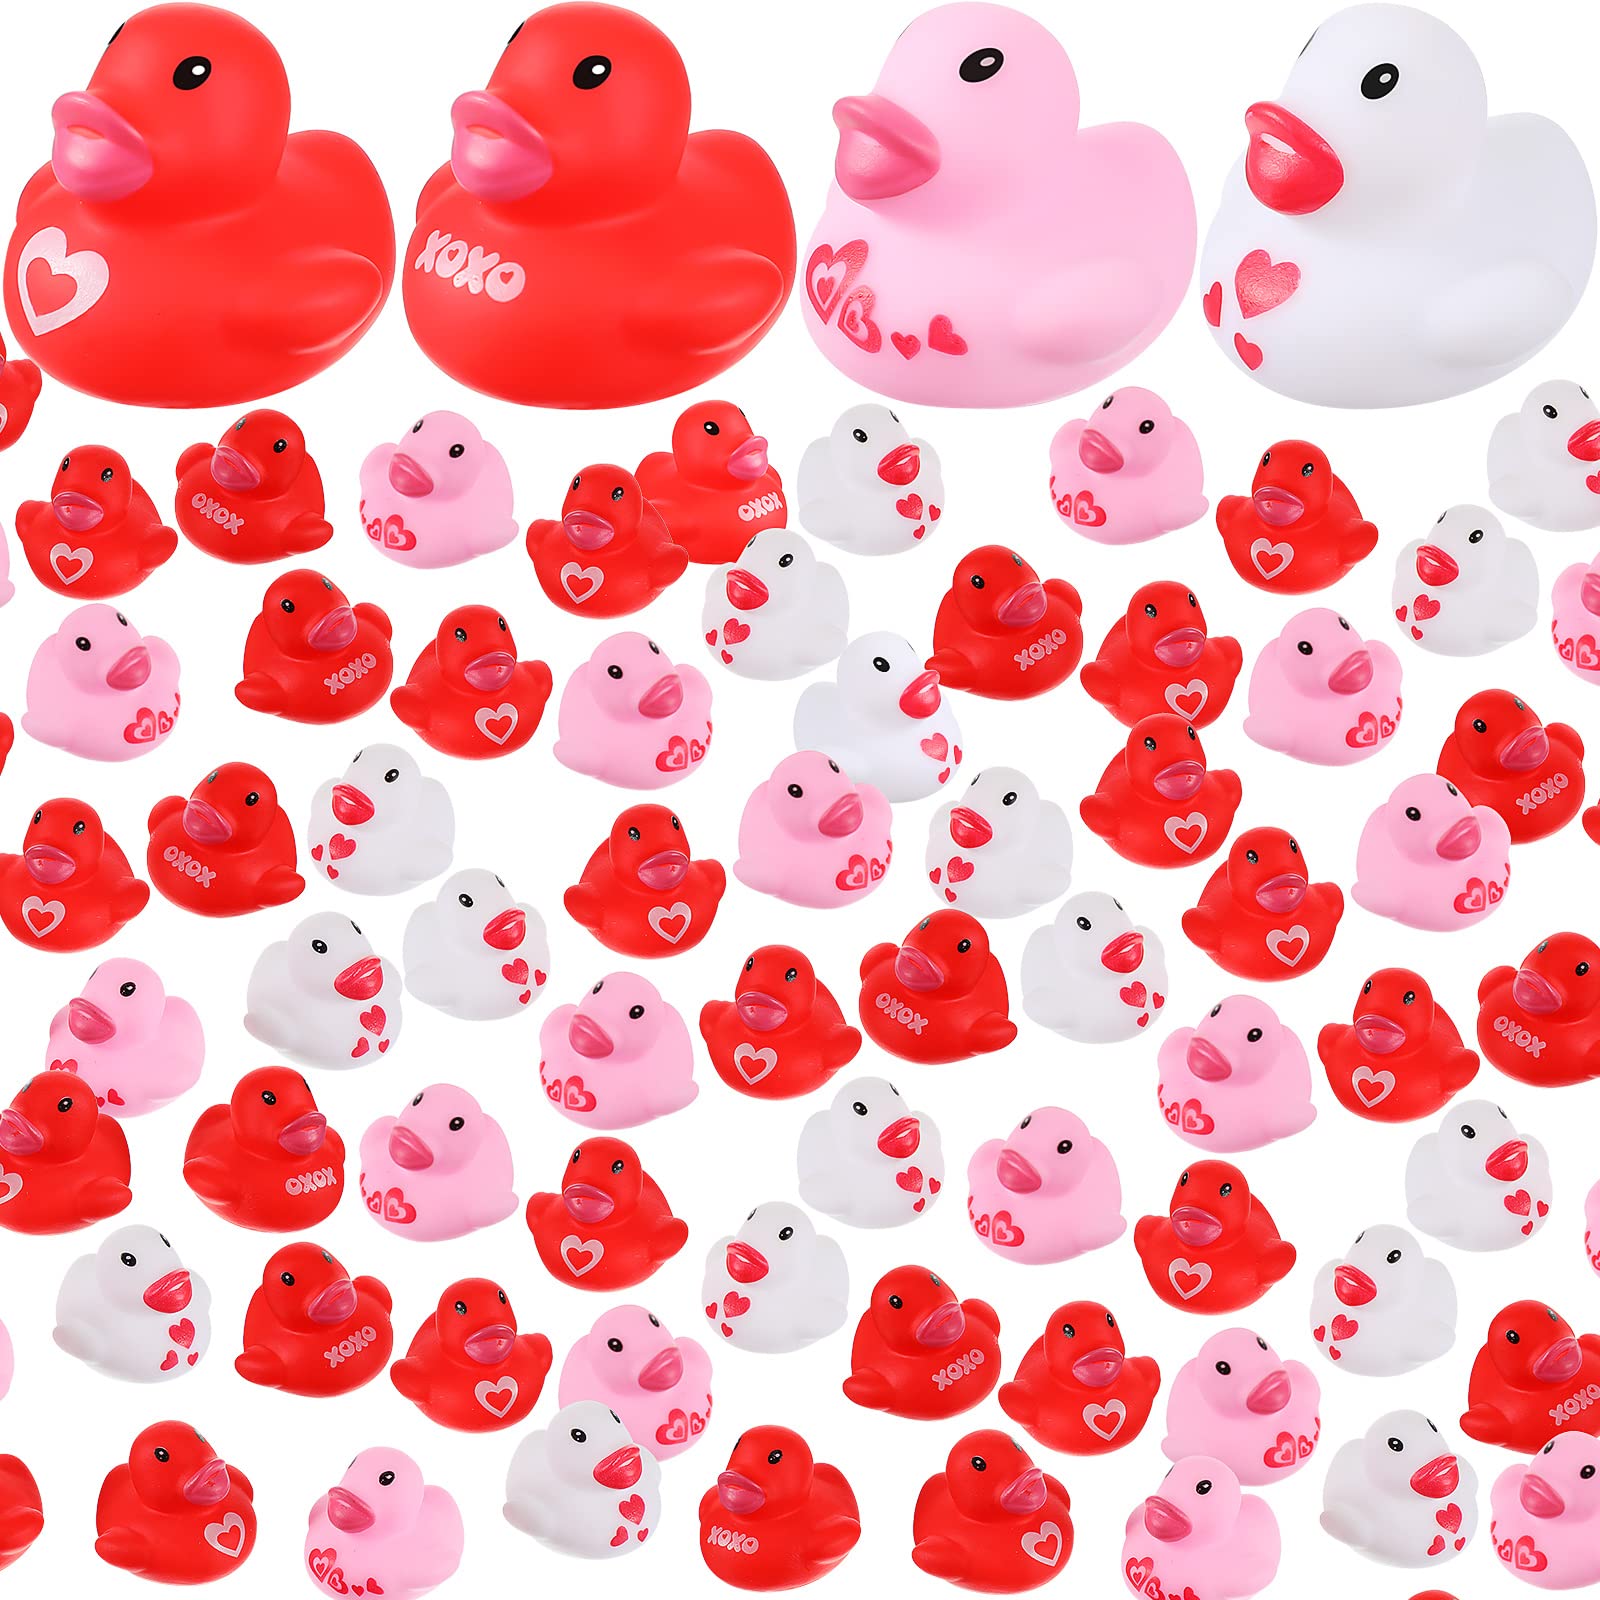 Jerify 100 Pcs Valentine's Day Rubber Ducks Mini Heart Rubber Ducks Christmas Ducks Bathtub Pool Toys for Valentines Party Favors Birthday Goodie Bag Fillers Gift